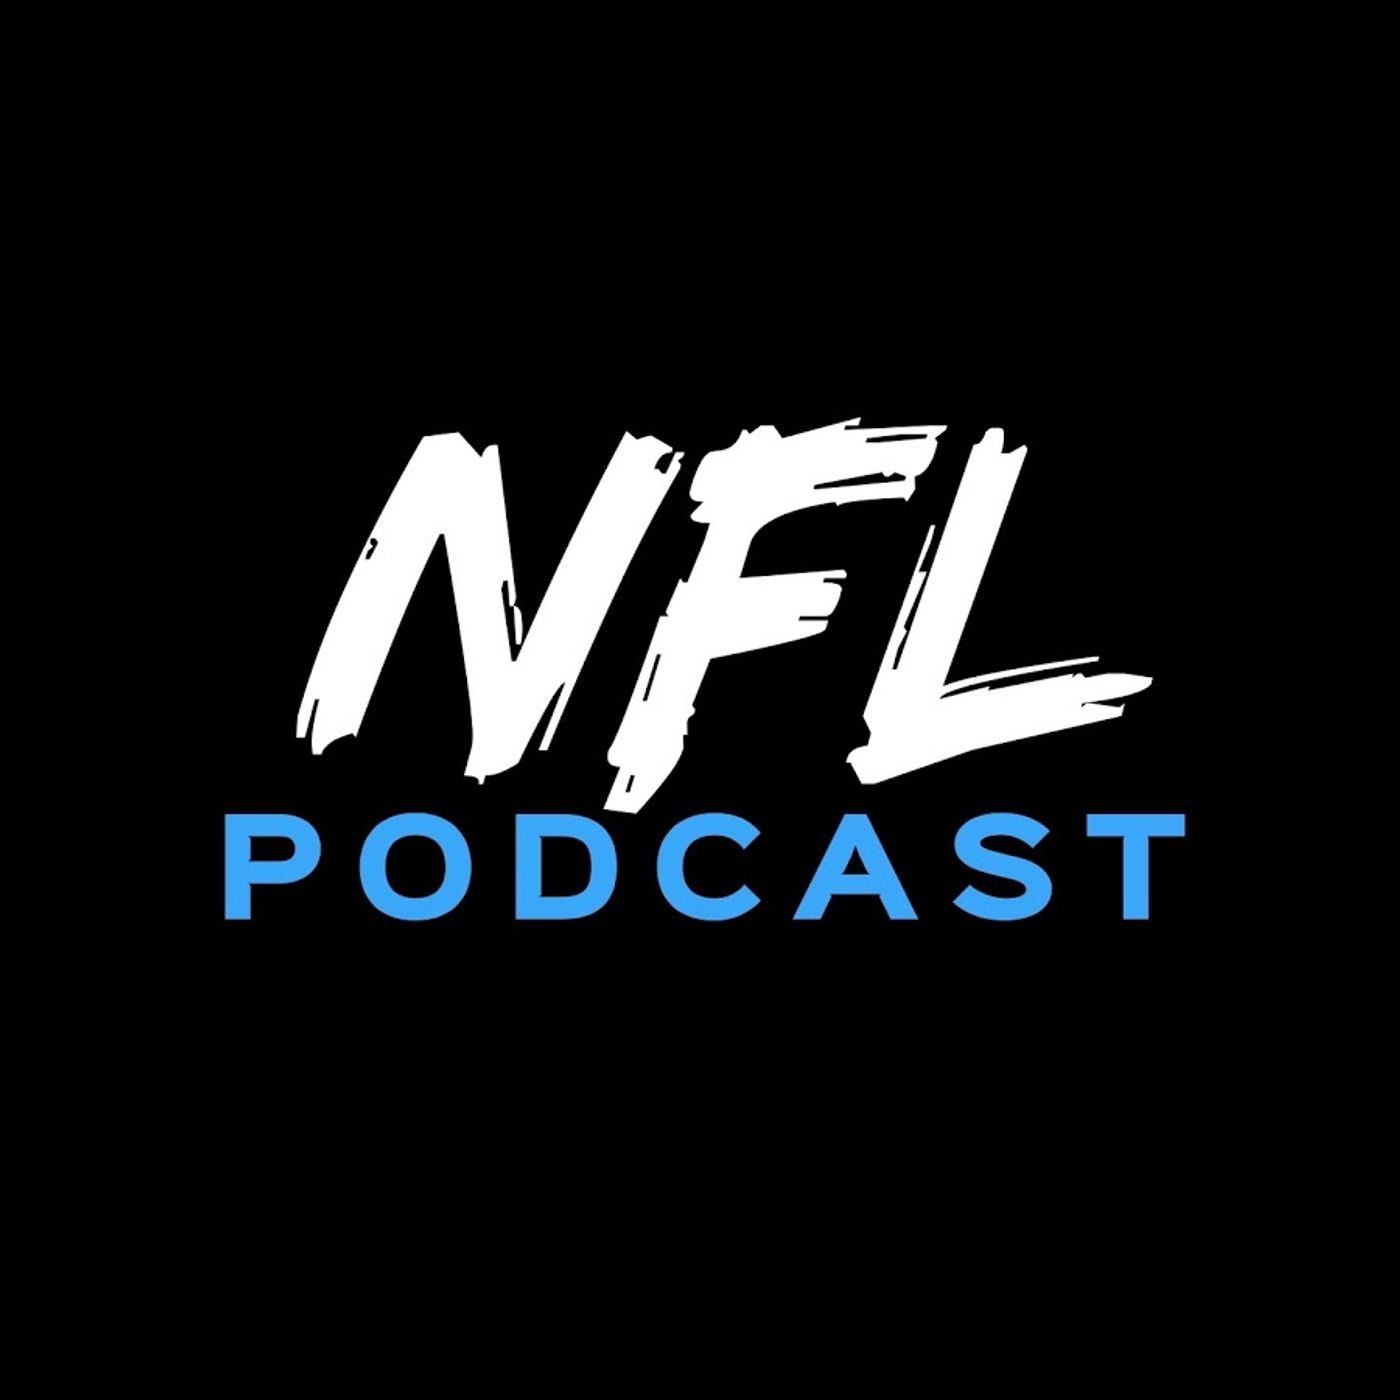 NFL PODCAST NFL PLAYOFFS WILDCARD REVIEW ROUND 2 DIVISIONAL PICKS COWBOYS TANK